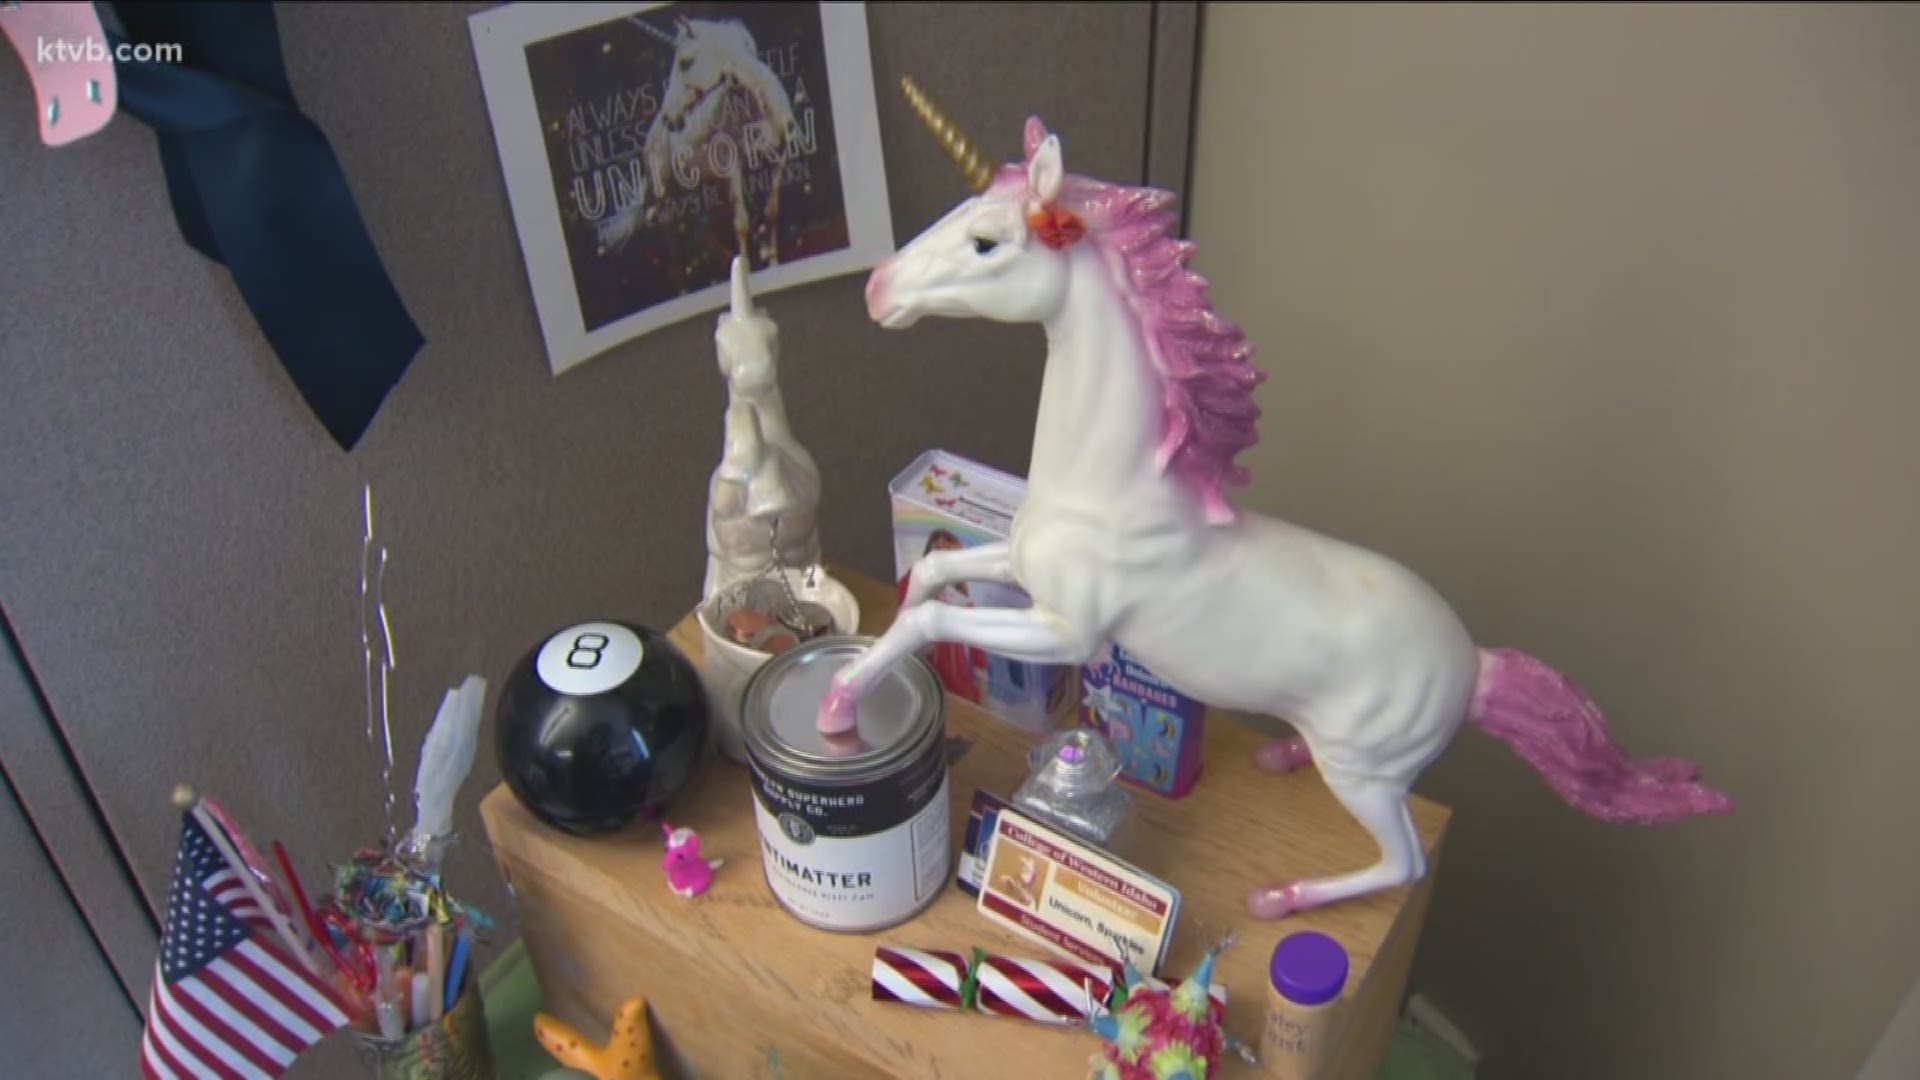 The College of Western Idaho is about to decide on a mascot for the first time in a decade. To the chagrin of many, though, Sparkles the Unicorn didn't make the cut.